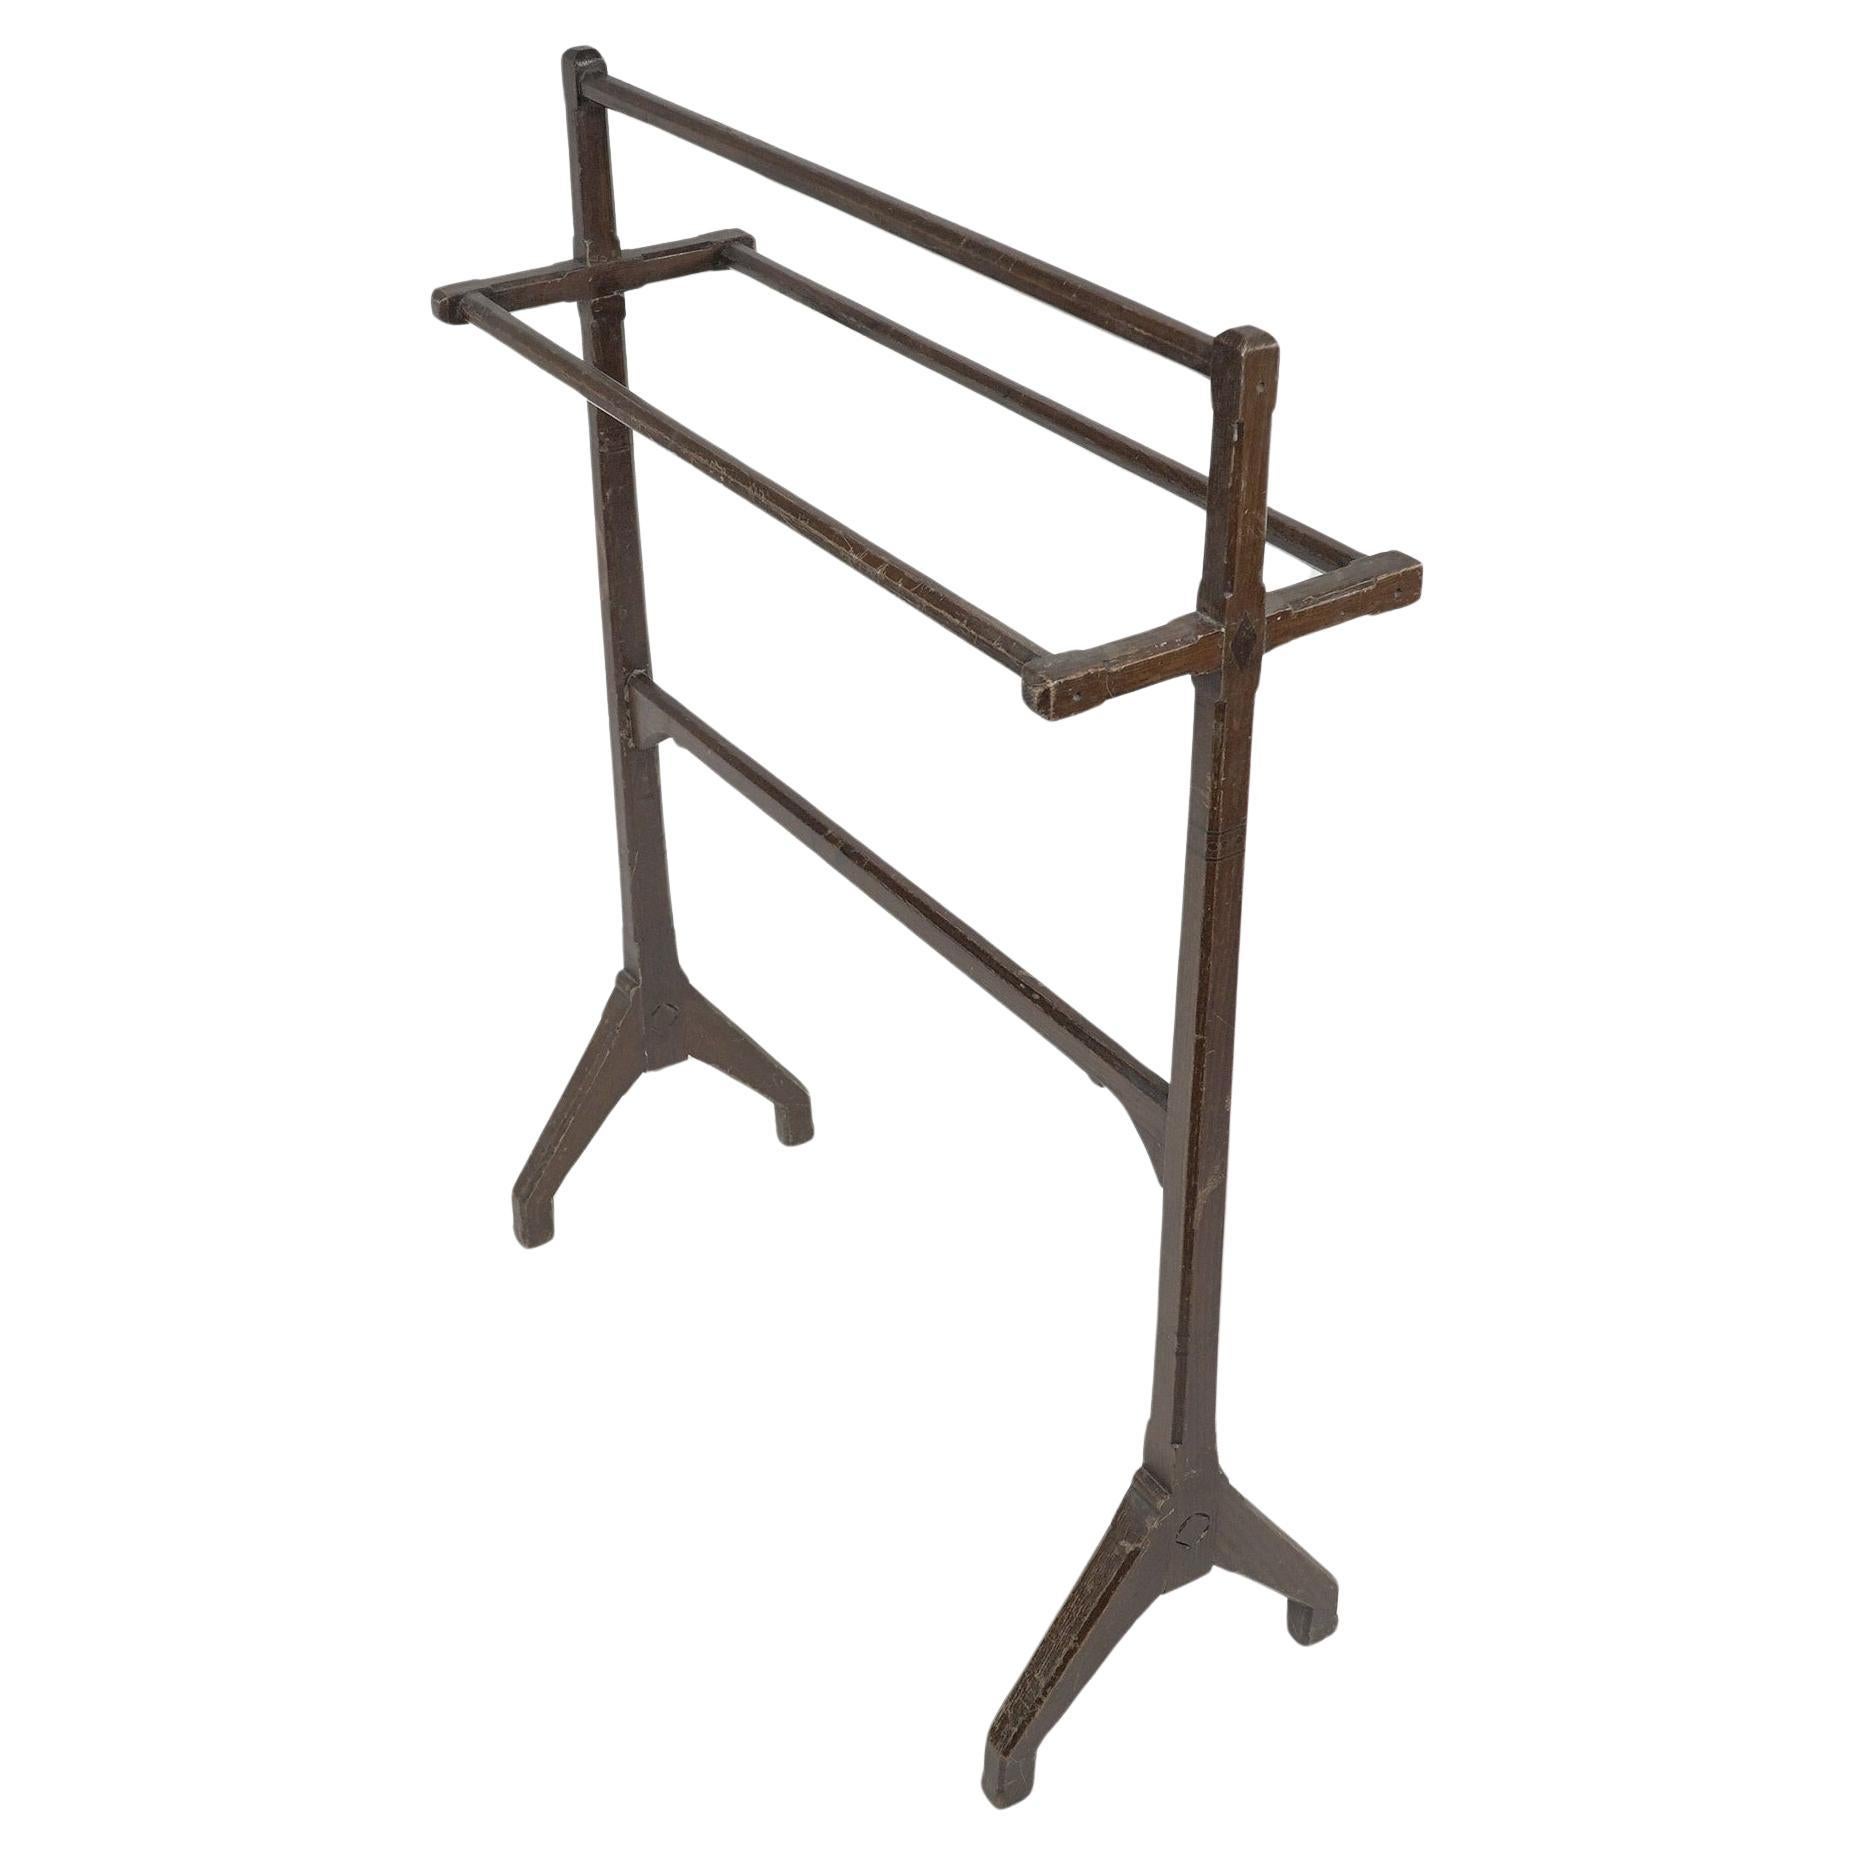 Charles Bevan attributed. An Aesthetic Movement oak towel rail with fine details